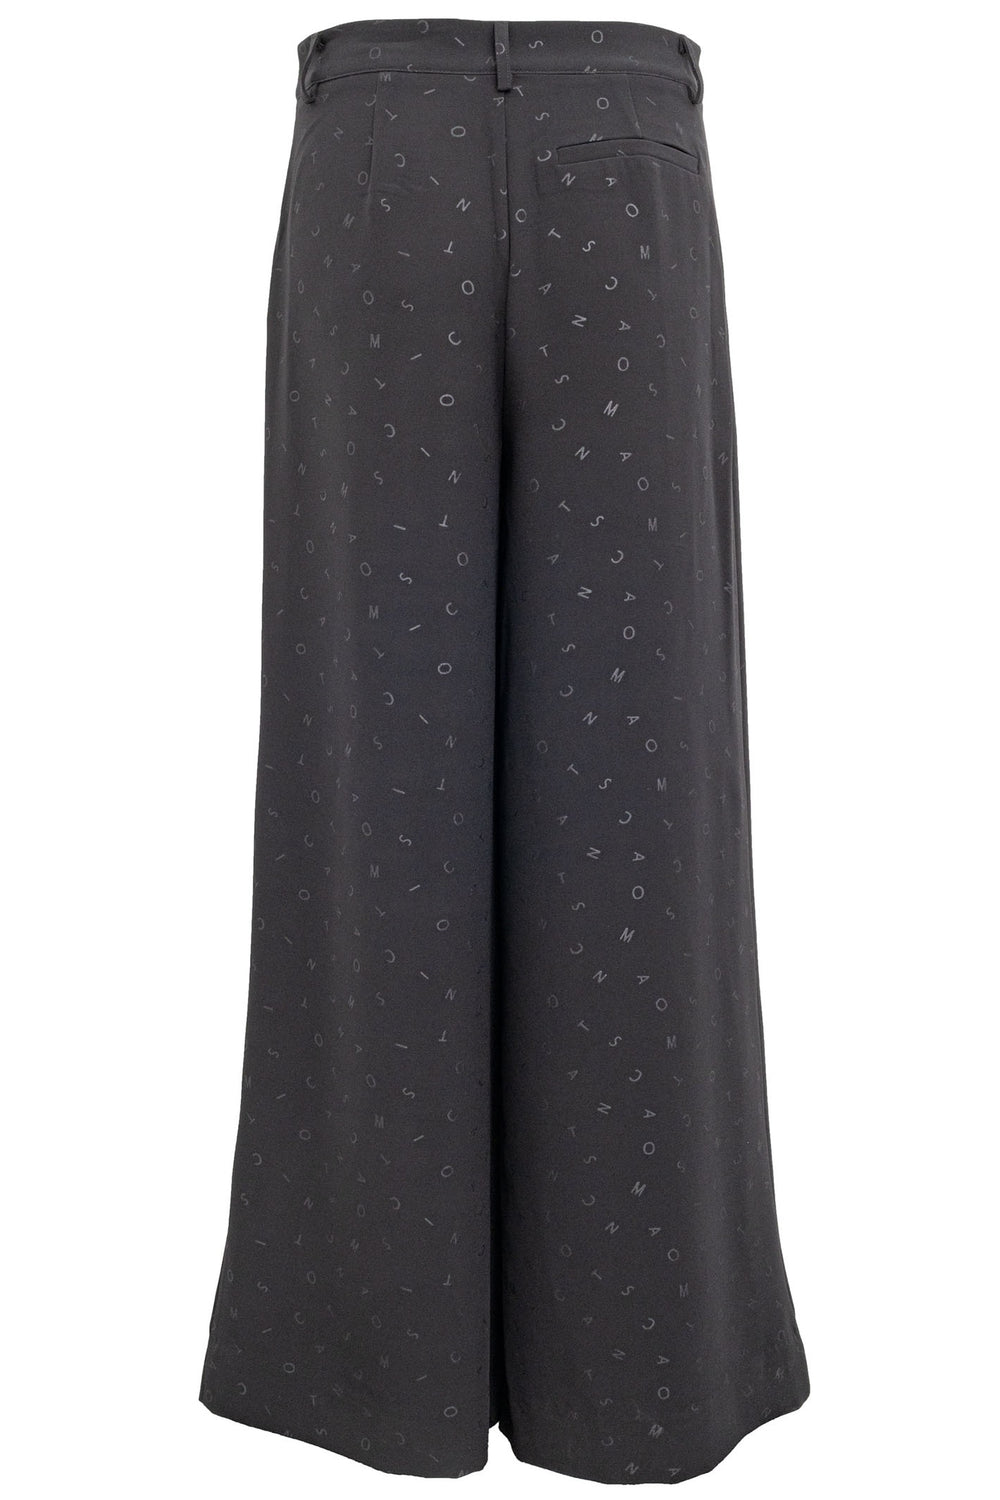 Costa Mani 2401407 Black Cimmie Trousers - Experience Boutique